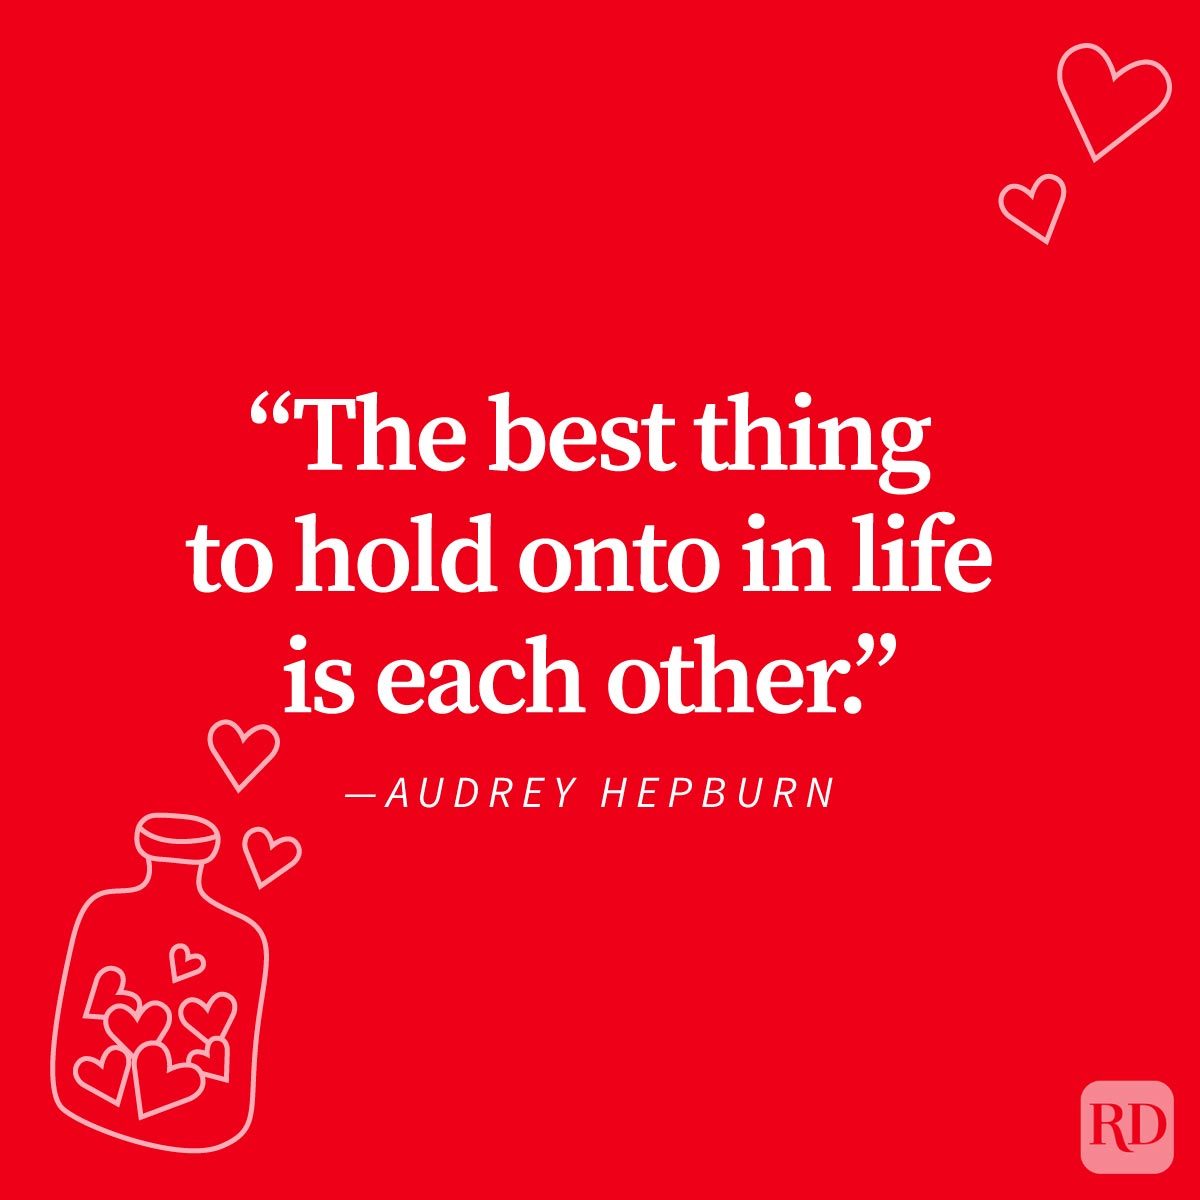 100 Love Quotes to Share with Your Special Someone